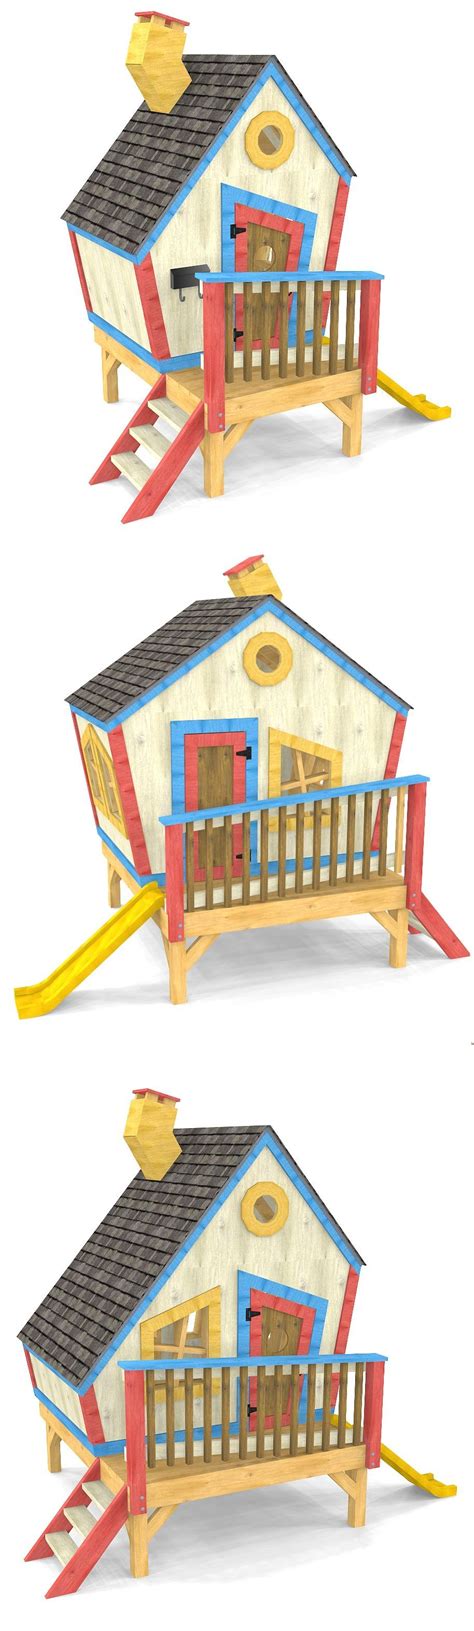 3 Diy Toddler Sized Playhouse Plans Wacky And Crooked In Design